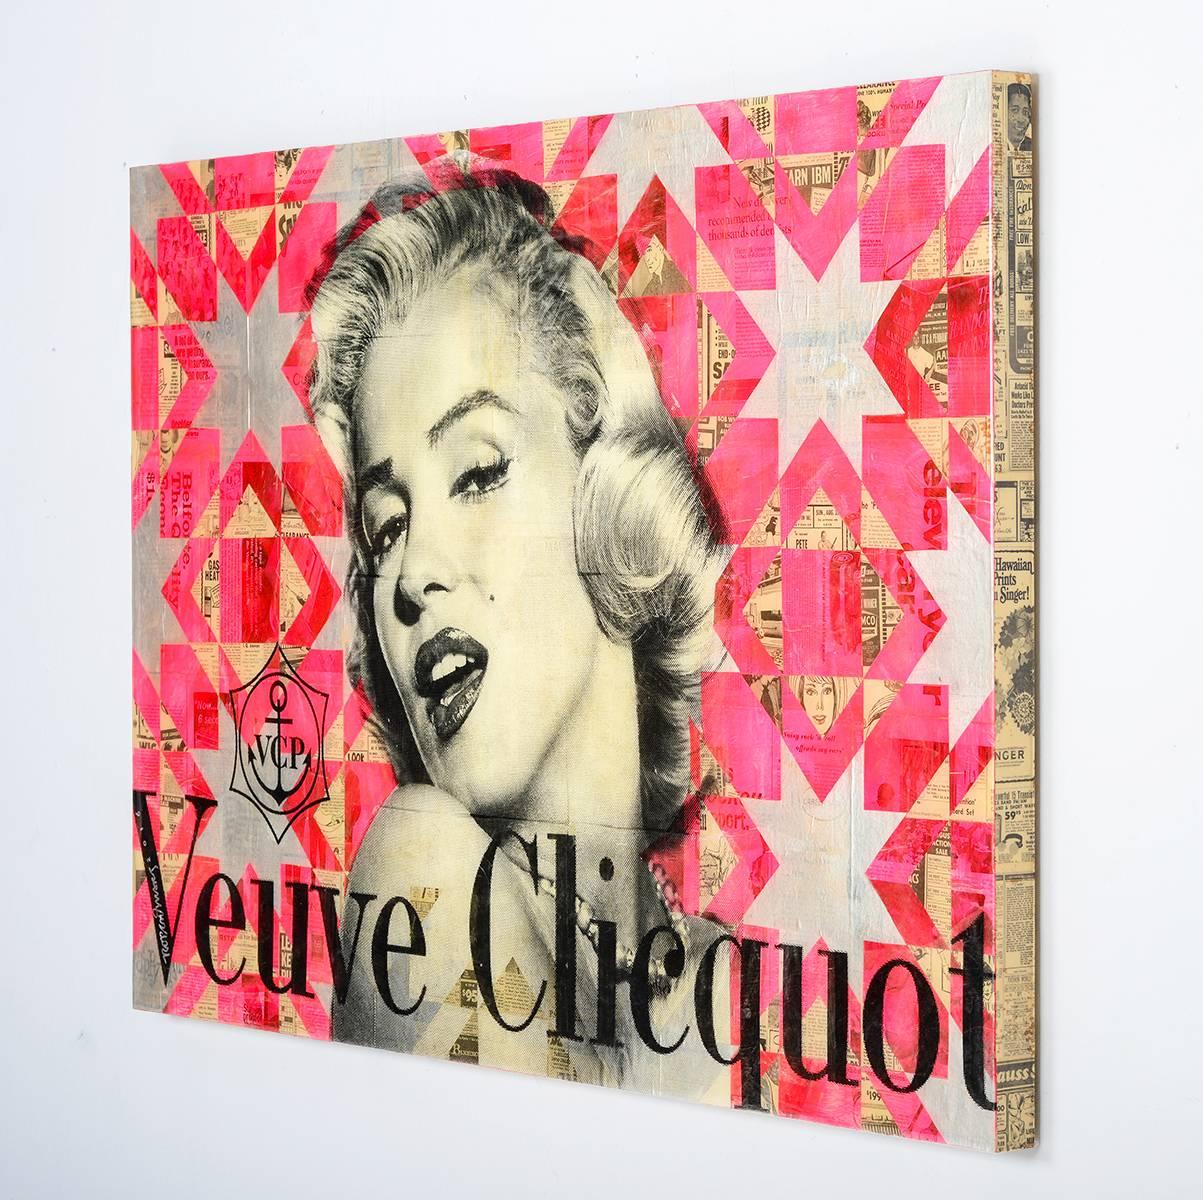 This one-of-a-kind Original comes framed, signed and ready-to-hang by Robert Mars.
40X60 inches
102X152 cm
_________________________________

Materials:
Mixed Media Collage On Wood Panel With Resin



Keywords: Marilyn Monroe, Original artworks,